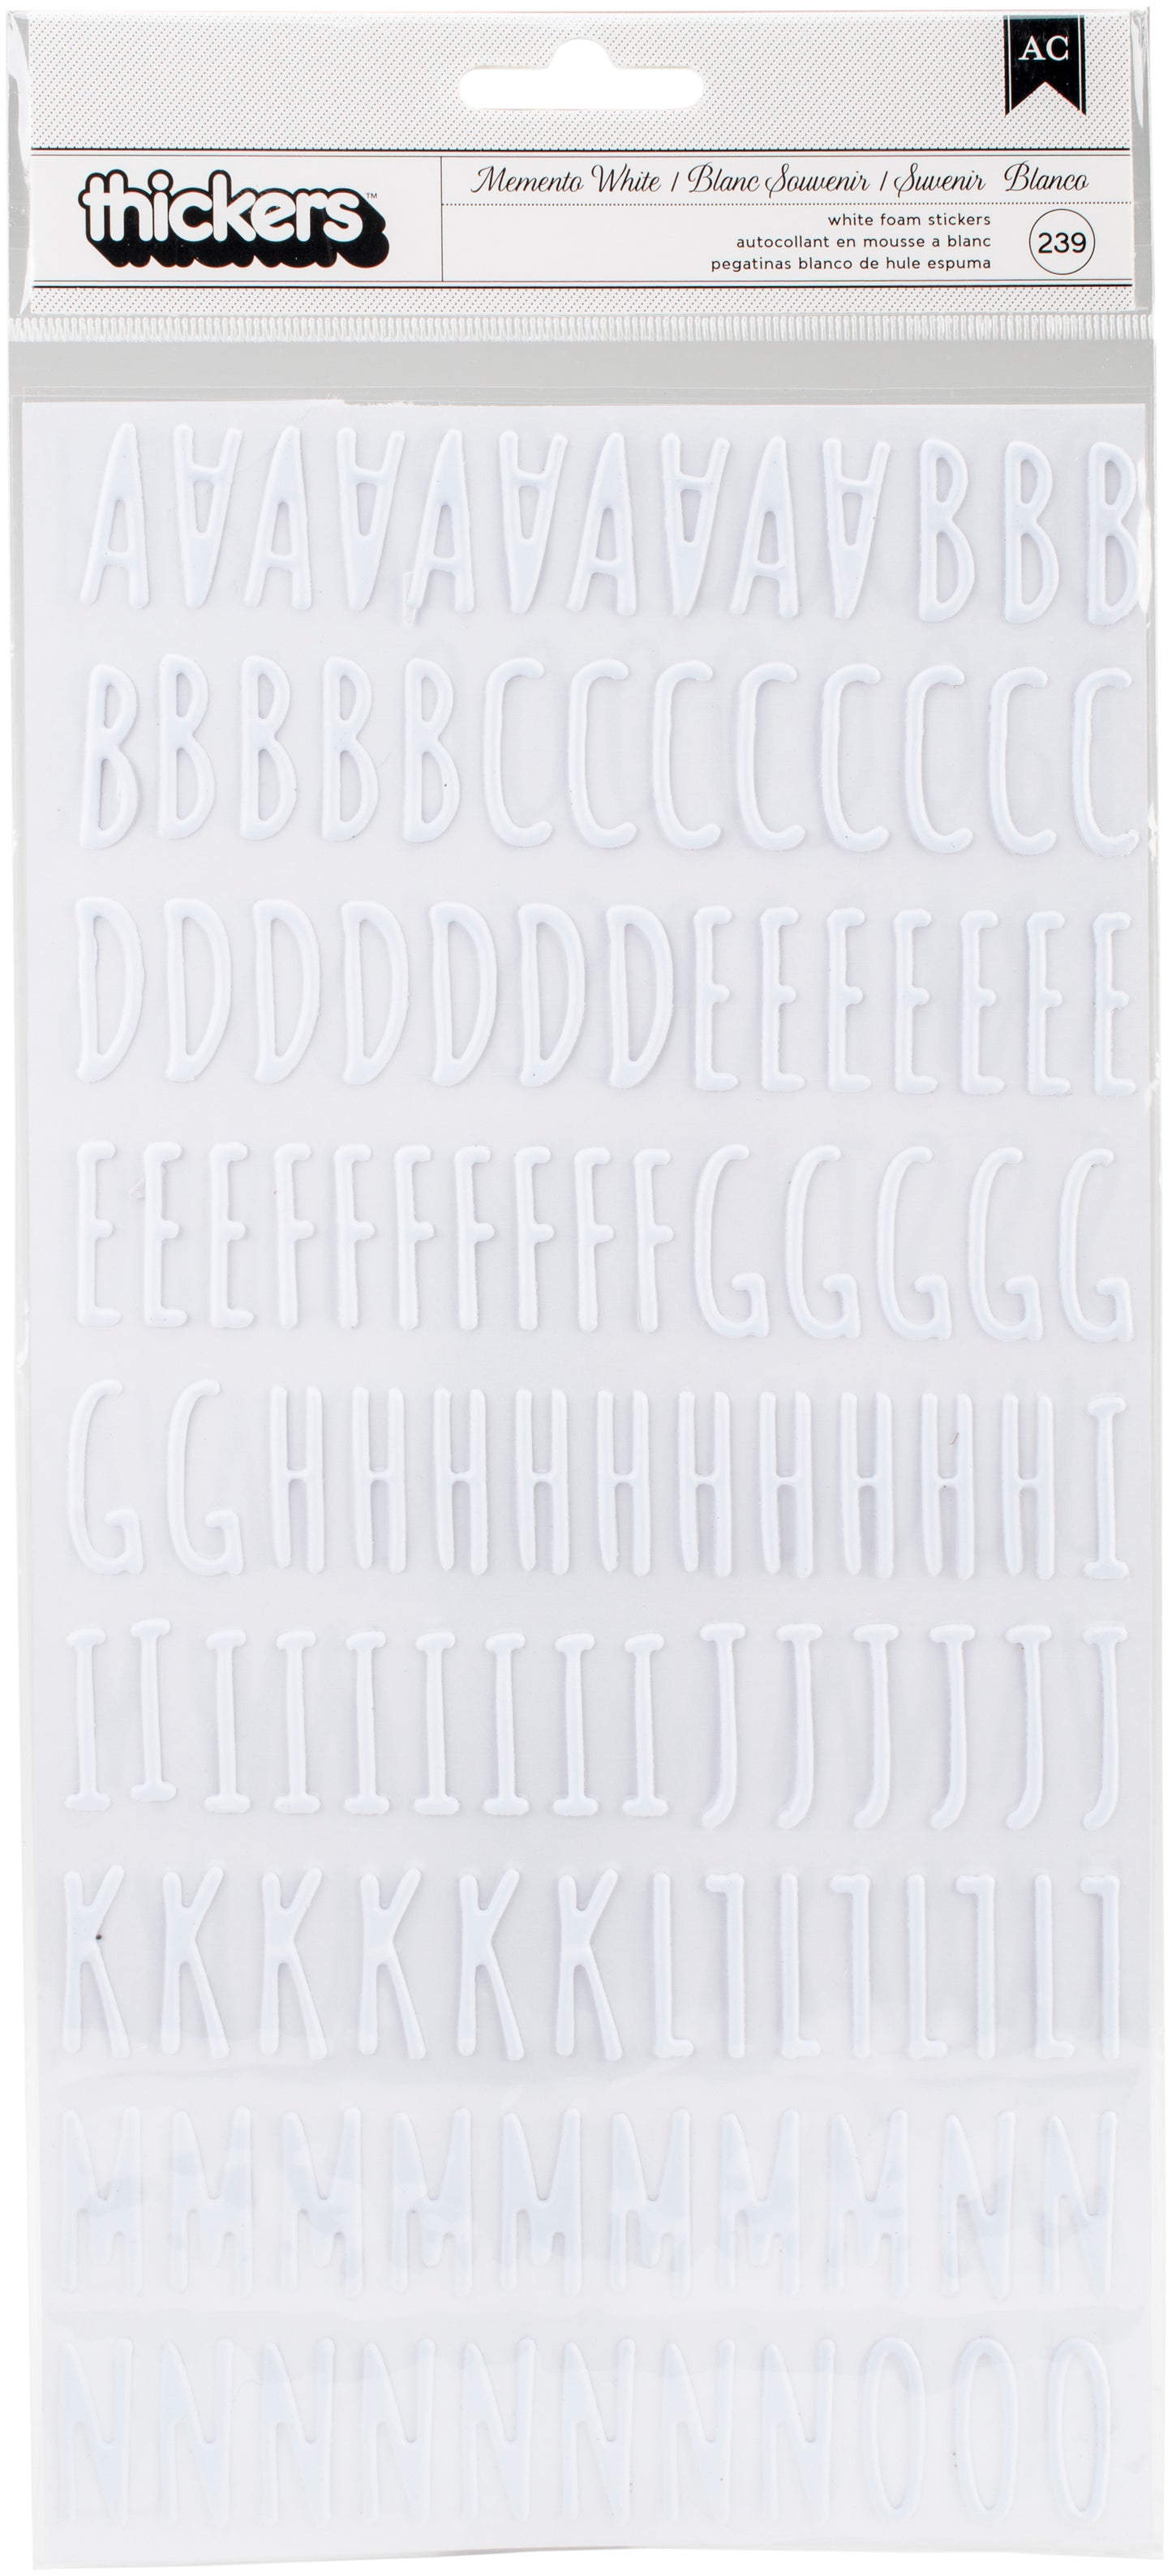  10 Sheet Large Letter Stickers, 595 Pieces 2 Inch Self